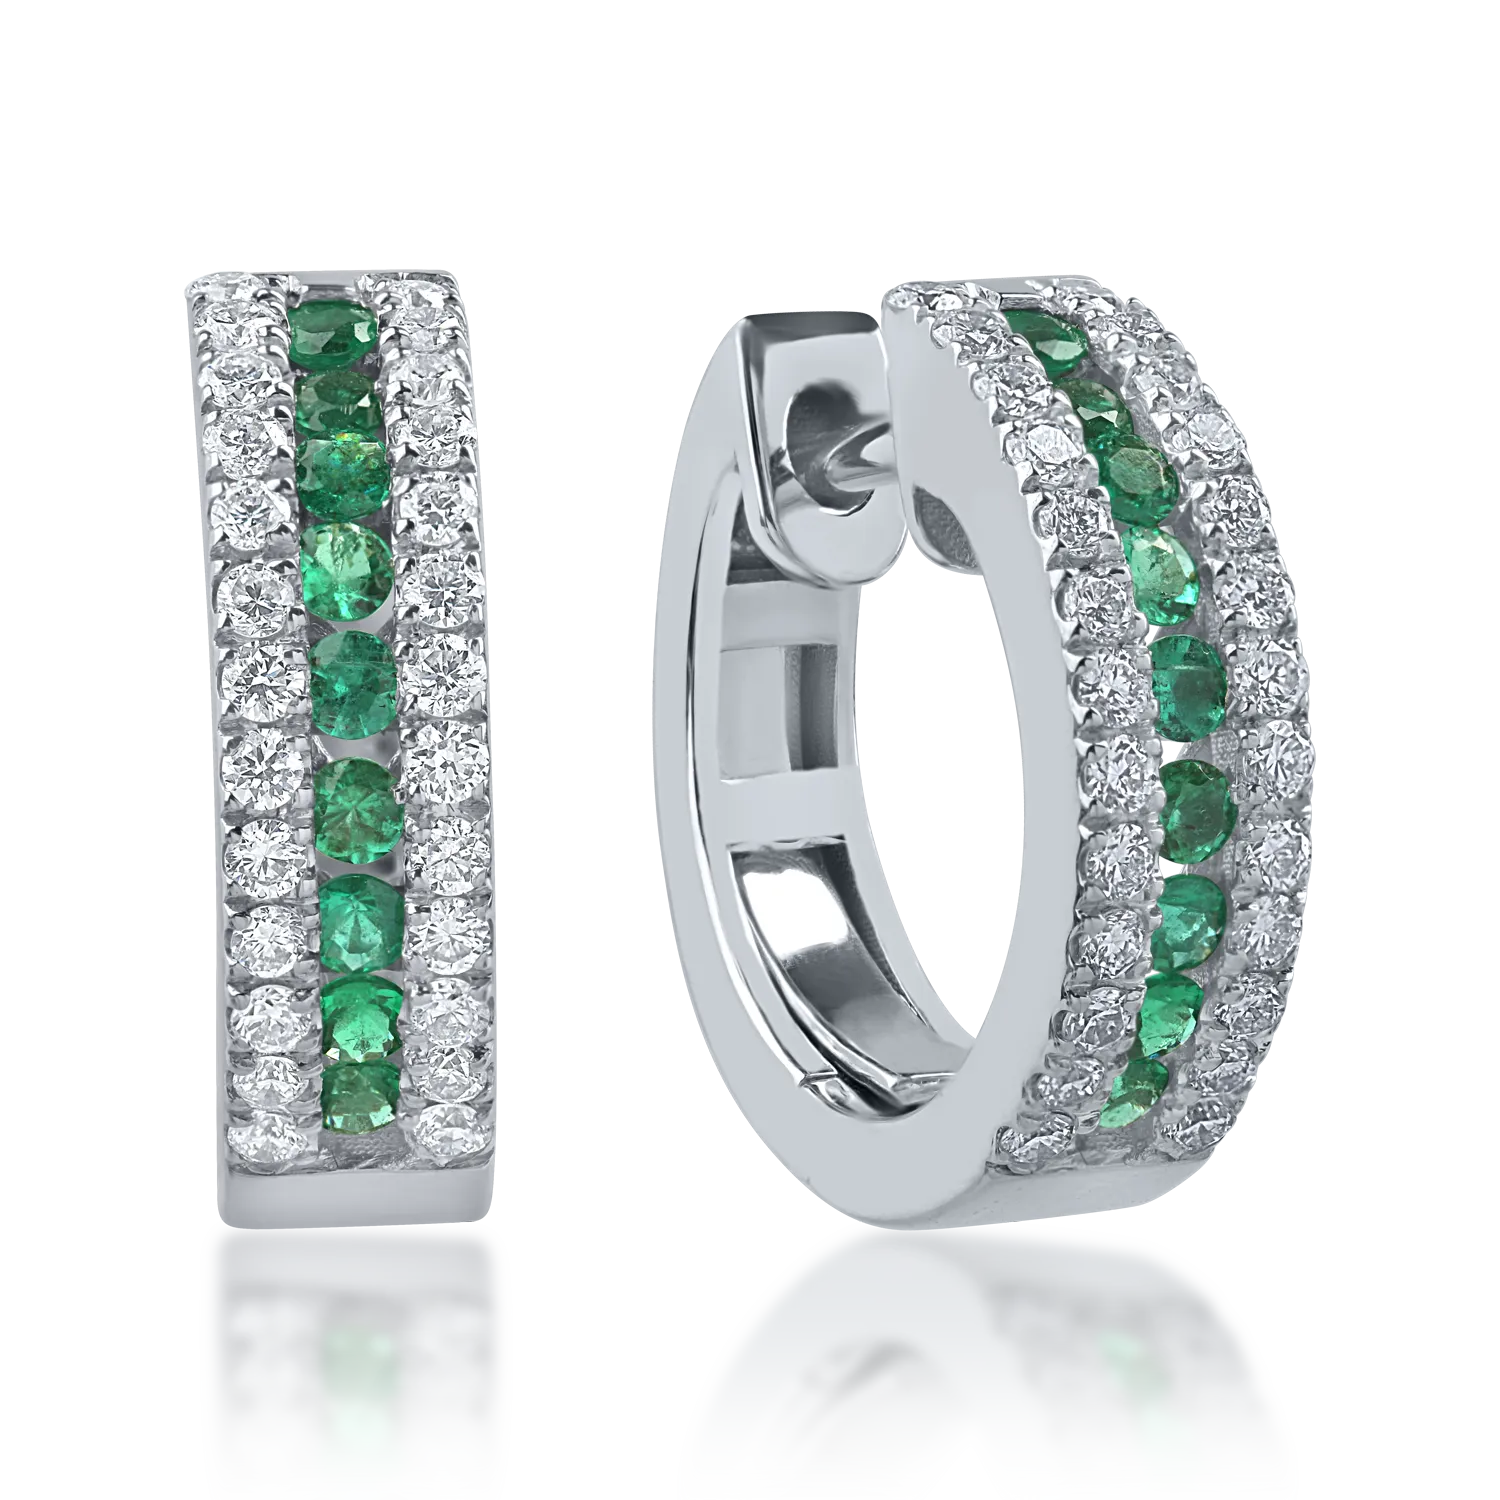 White gold earrings with 0.26ct emeralds and 0.32ct diamonds